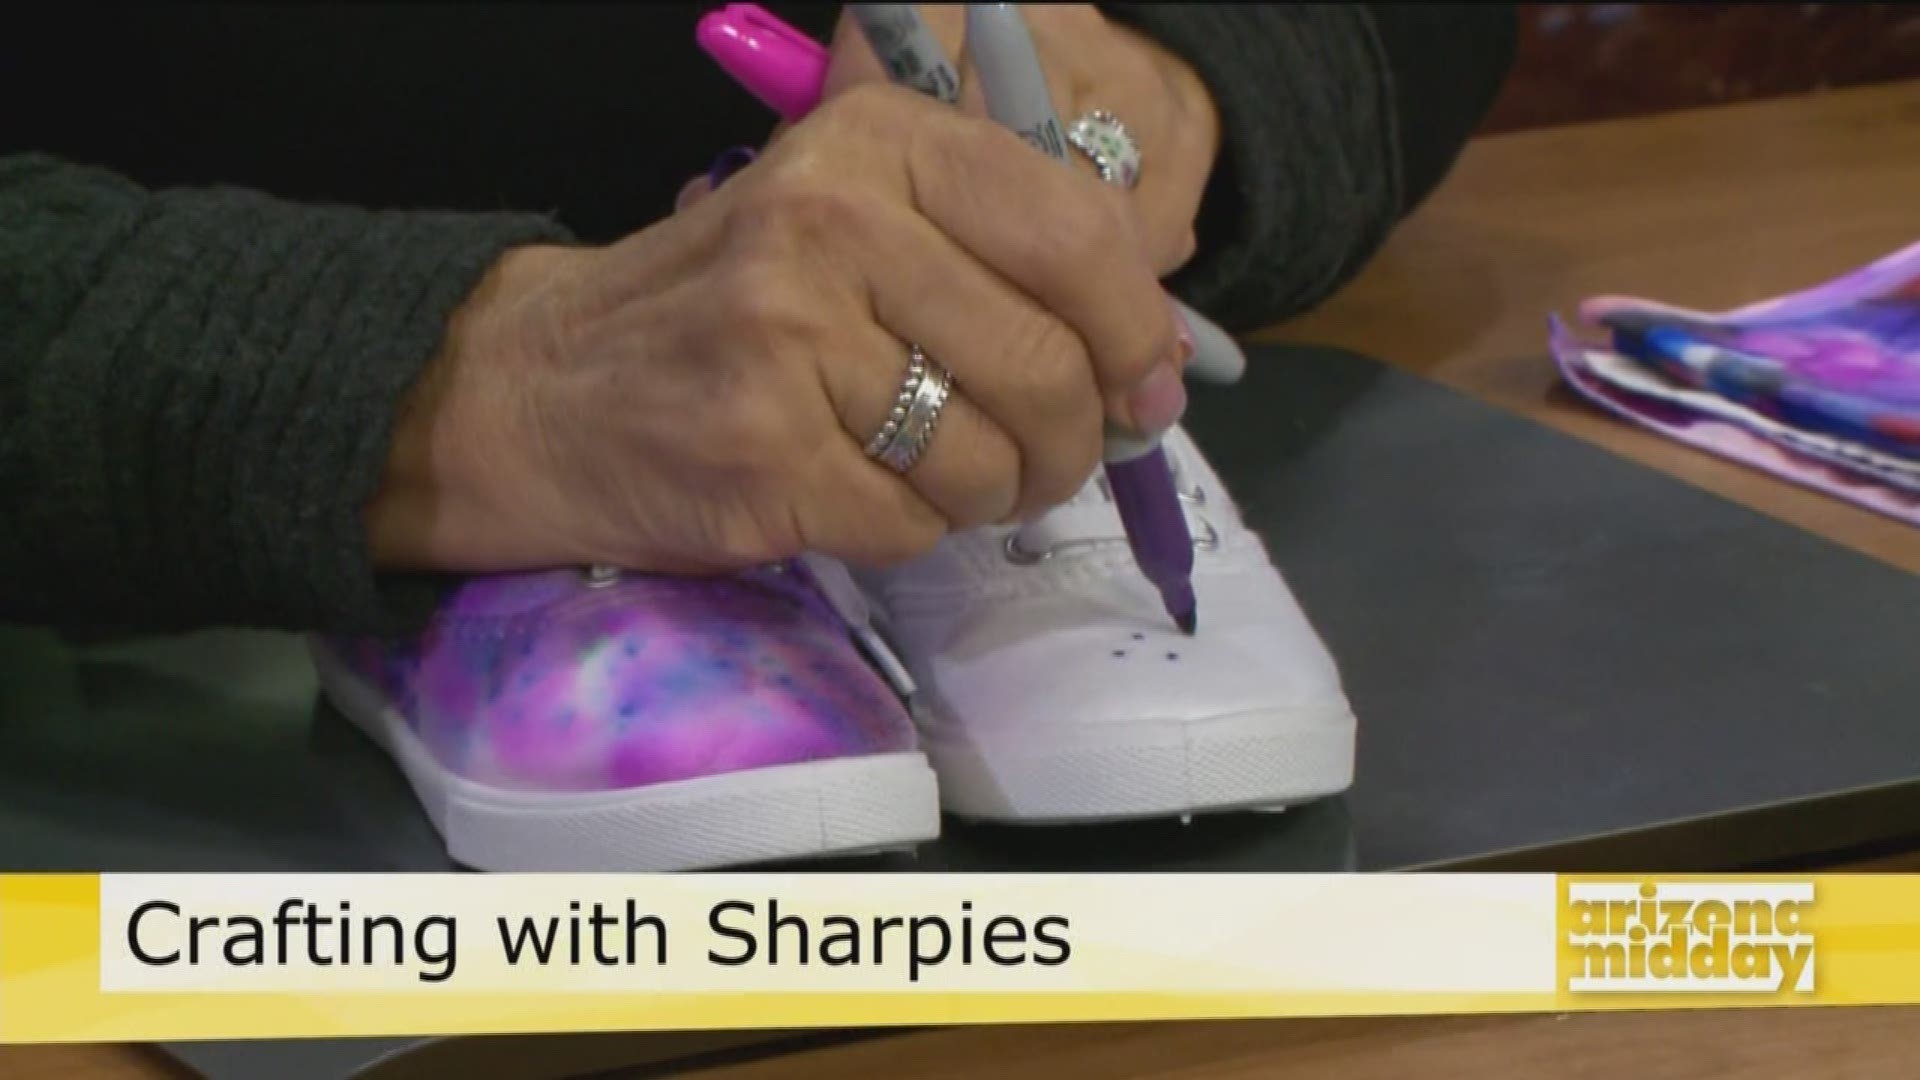 Jan shows us how to get crafty with sharpies